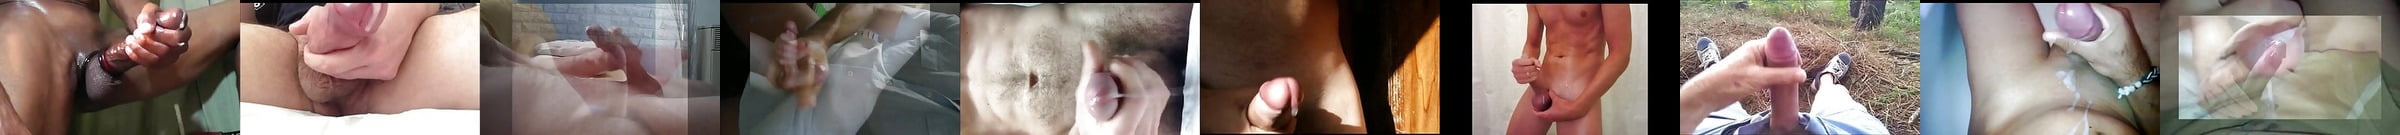 Close Up Cock Cumming In Slow Motion Gay Porn Cc Xhamster Xhamster